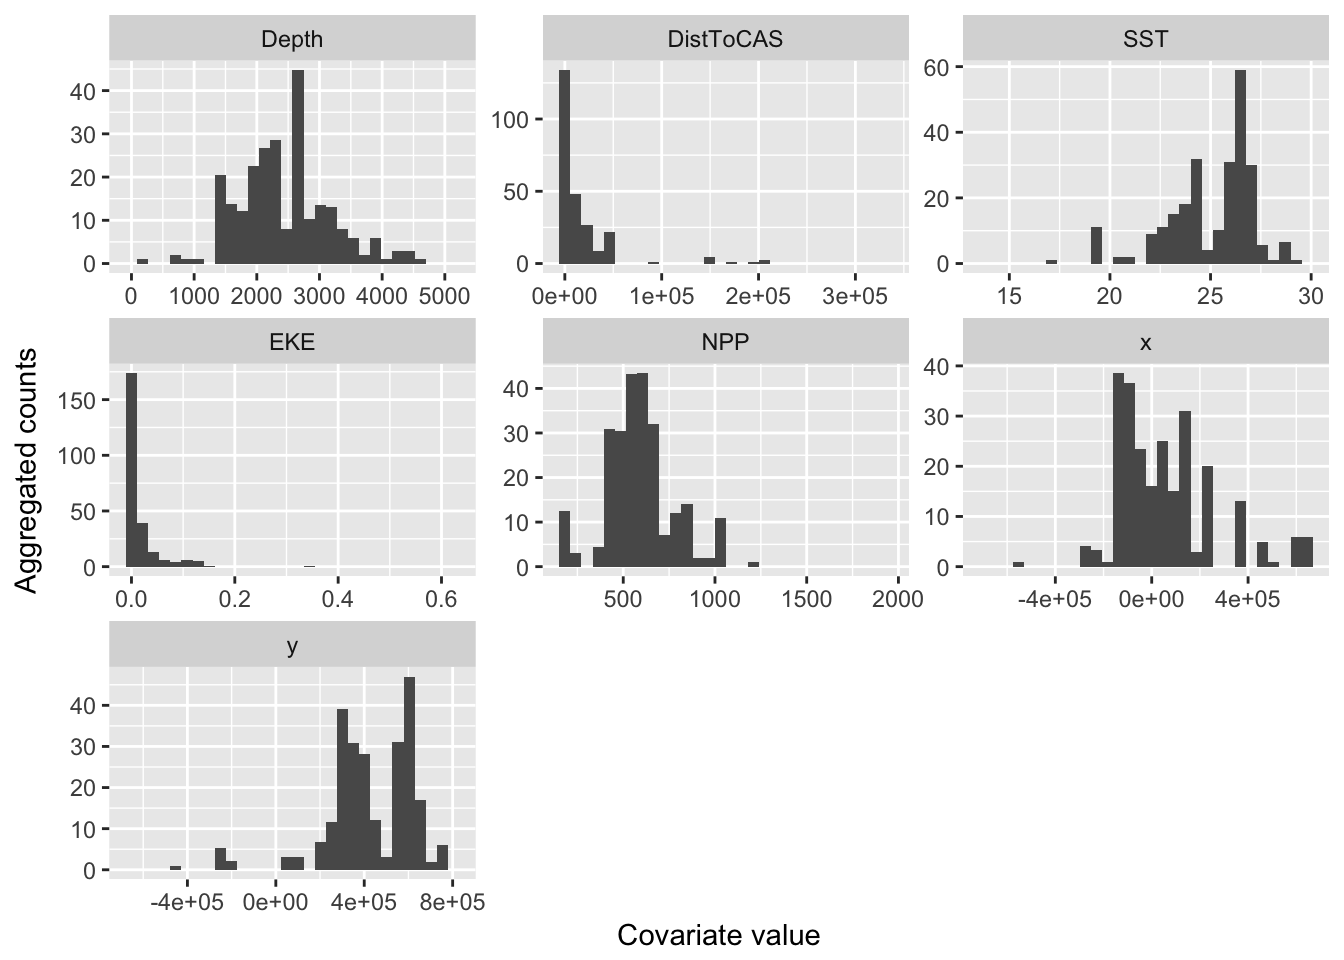 Histograms of segment counts at various covariate levels.